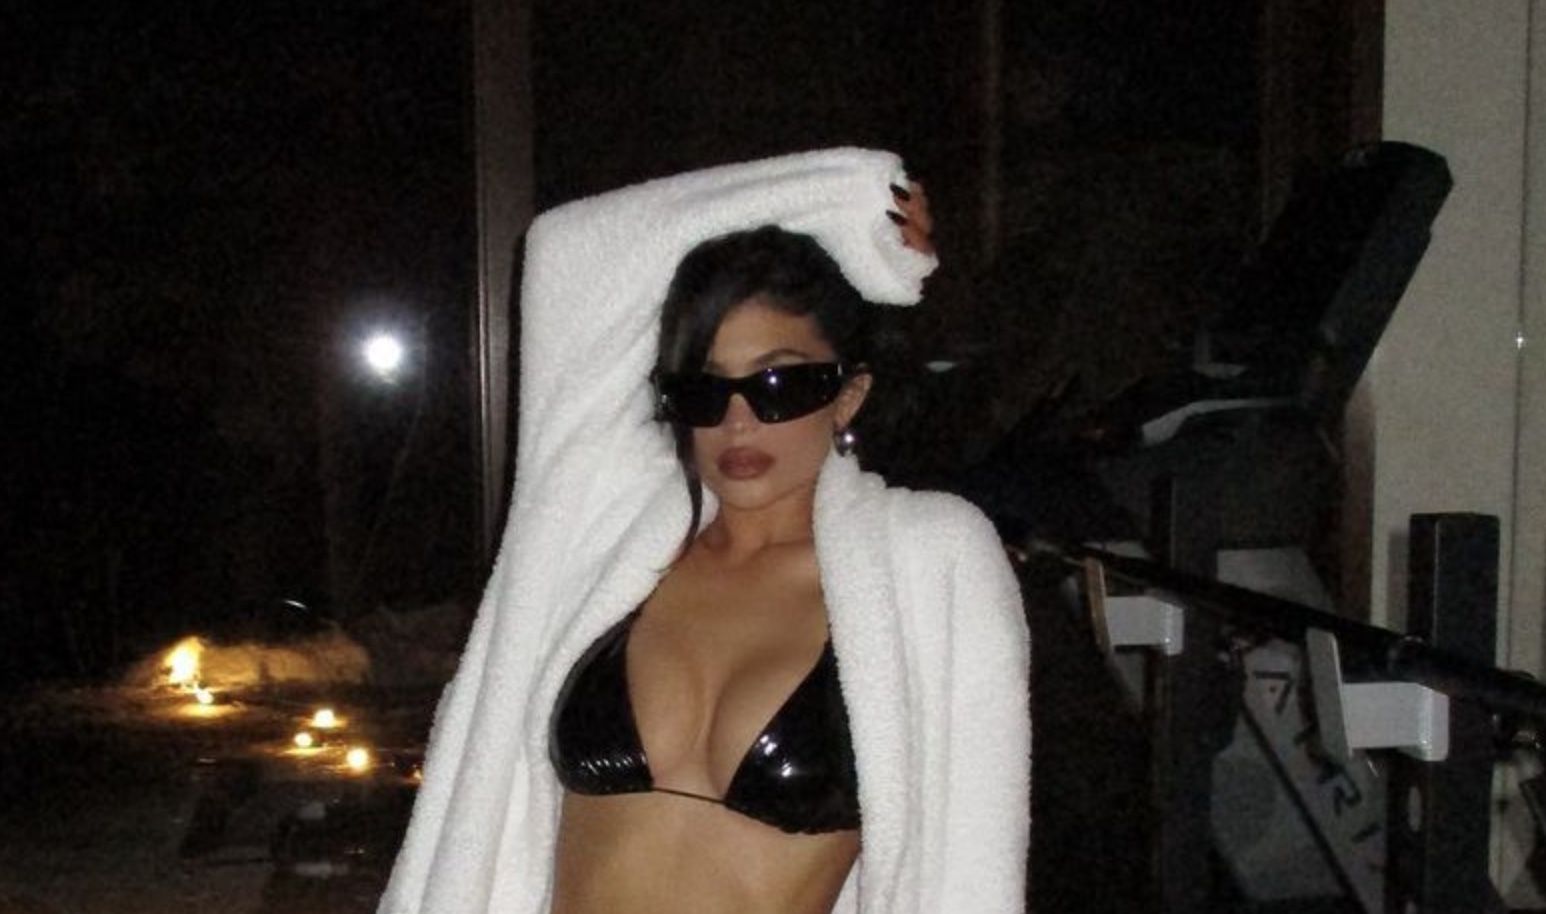 Kylie Jenner showcases her incredibly taut midriff in a black